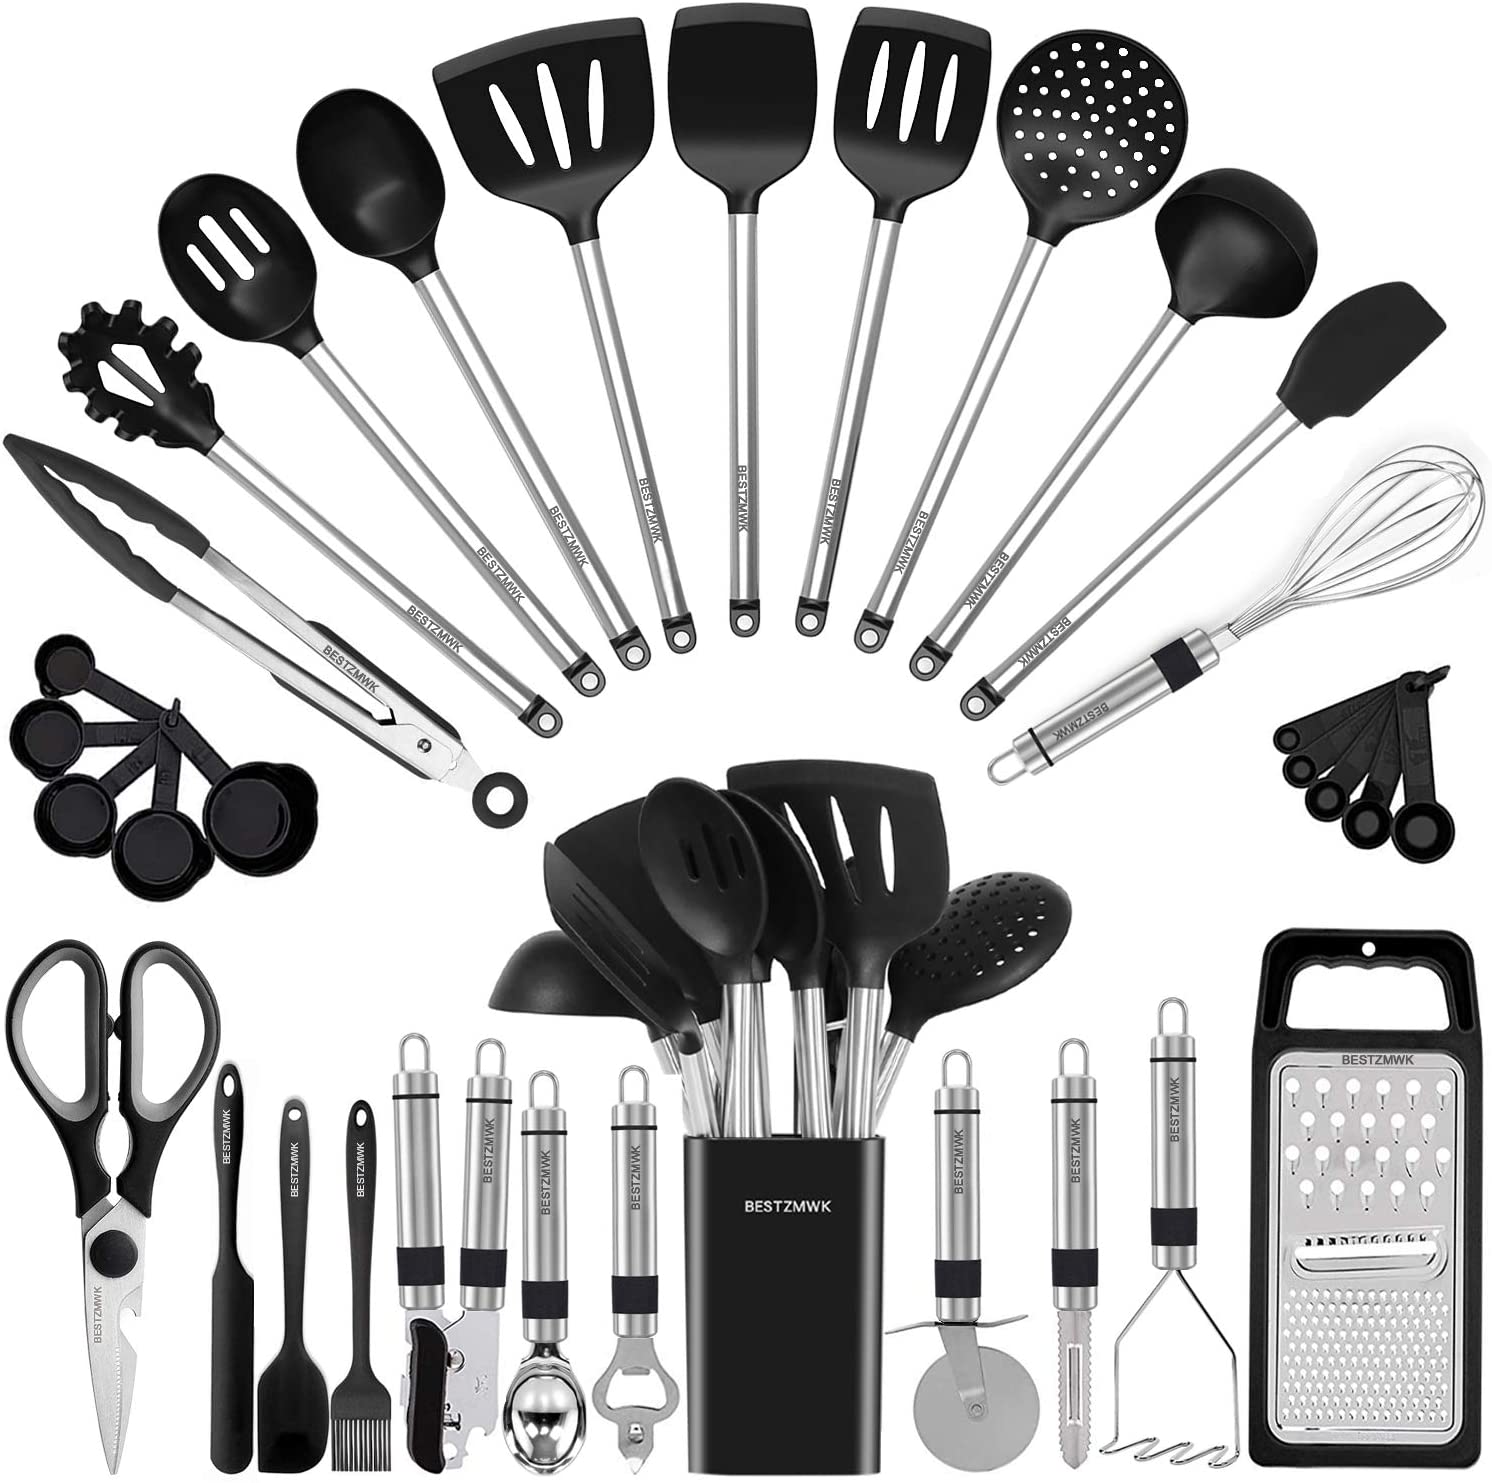 Kitchen Utensil Set-Silicone Cooking Utensils- 33 Kitchen Gadgets and Spoons for Nonstick Cookware